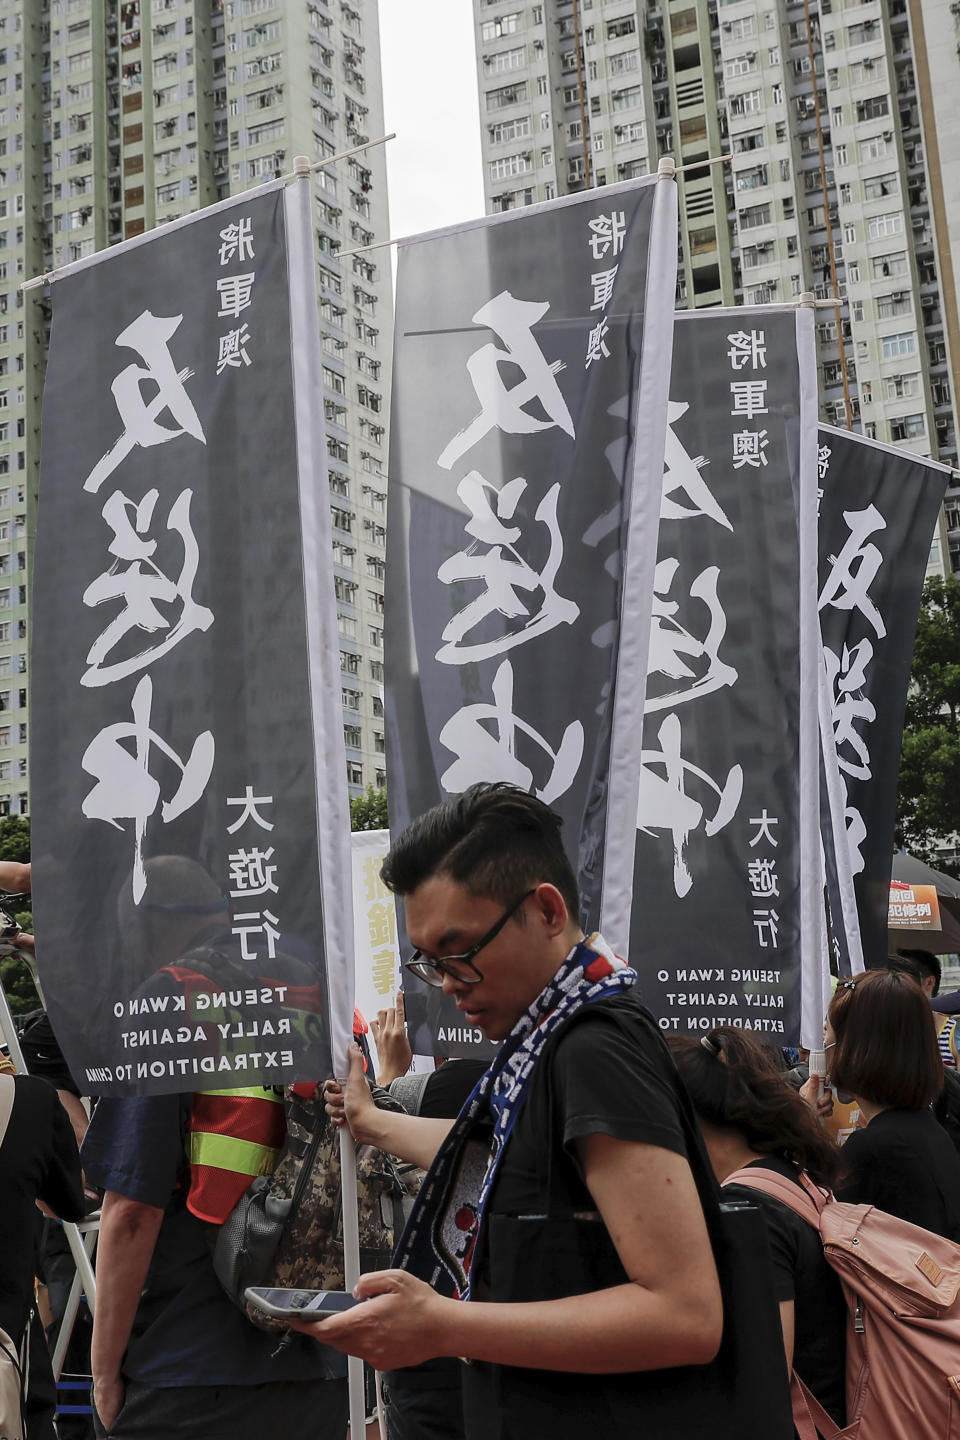 Protesters hold Anti-Extradition Bill banners as they take part in a march in Hong Kong, Sunday, Aug. 4, 2019. Hong Kong police said Sunday that they arrested more than 20 people for unlawful assembly, assault and other offences after confrontations between protesters and authorities continued deep into the night. (AP Photo/Vincent Thian)